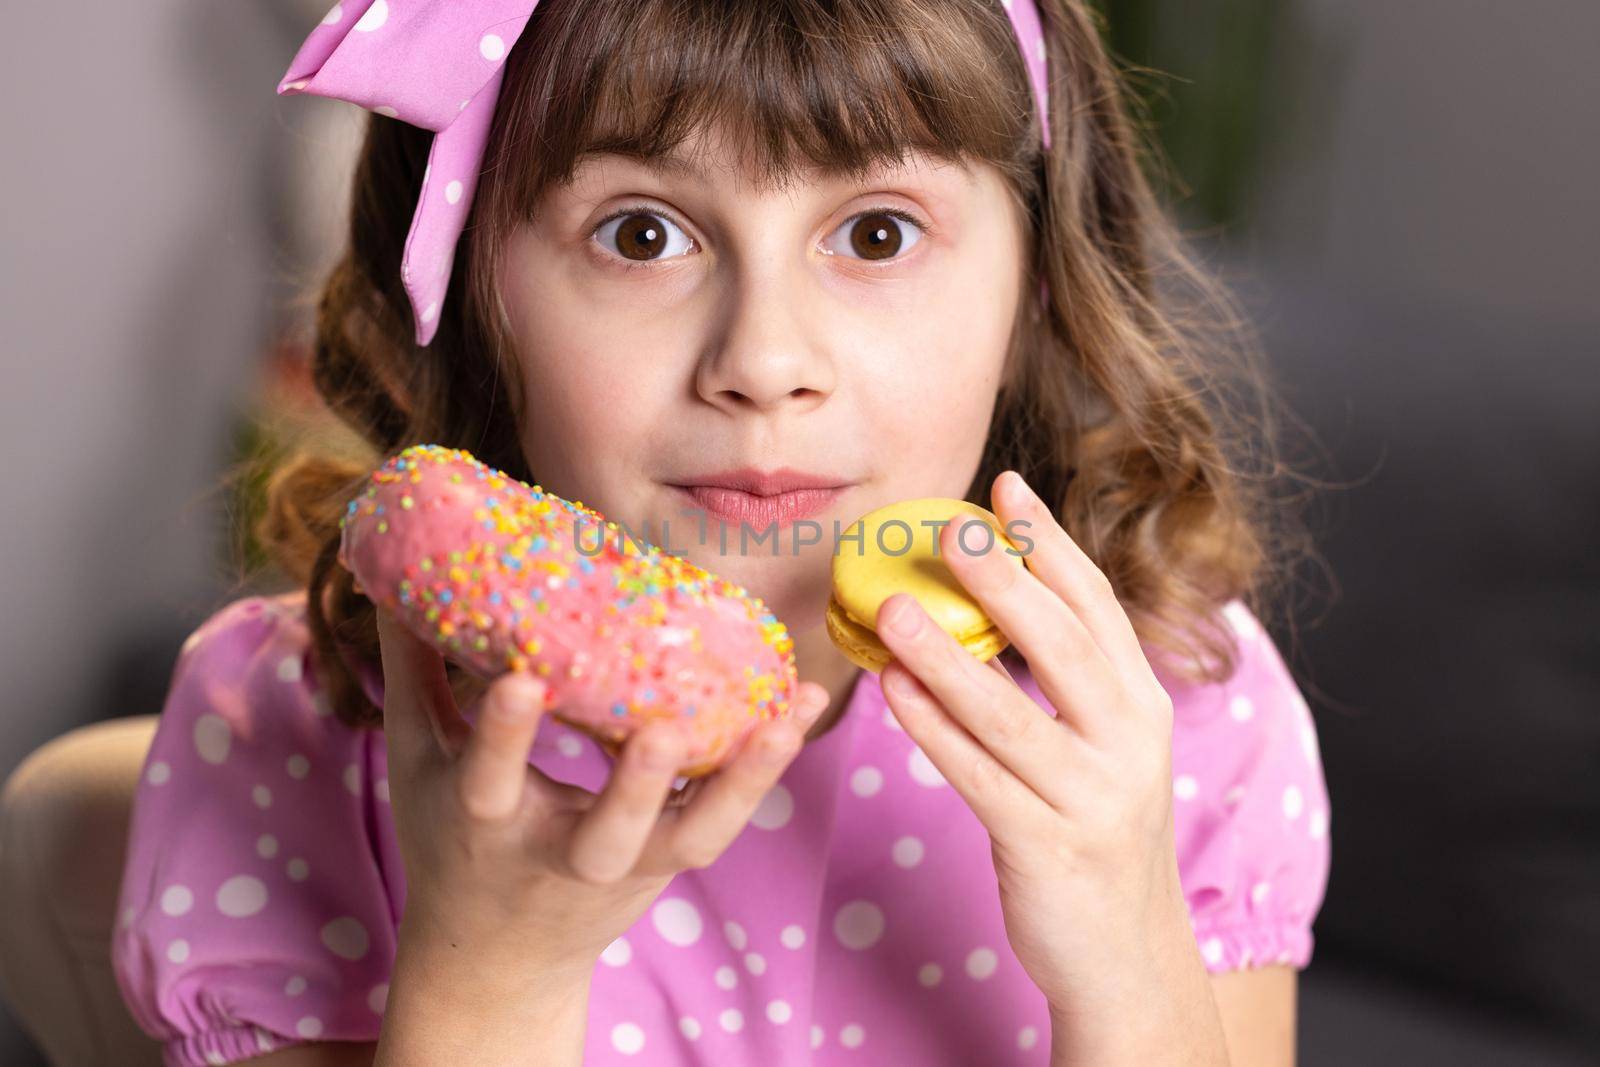 Cute little girl in pink dress holding macaron and donut in hands by the face. Funny concept with sweets. Adolescent school girl plays with sweet donuts doing happy fun face expressions on background by uflypro